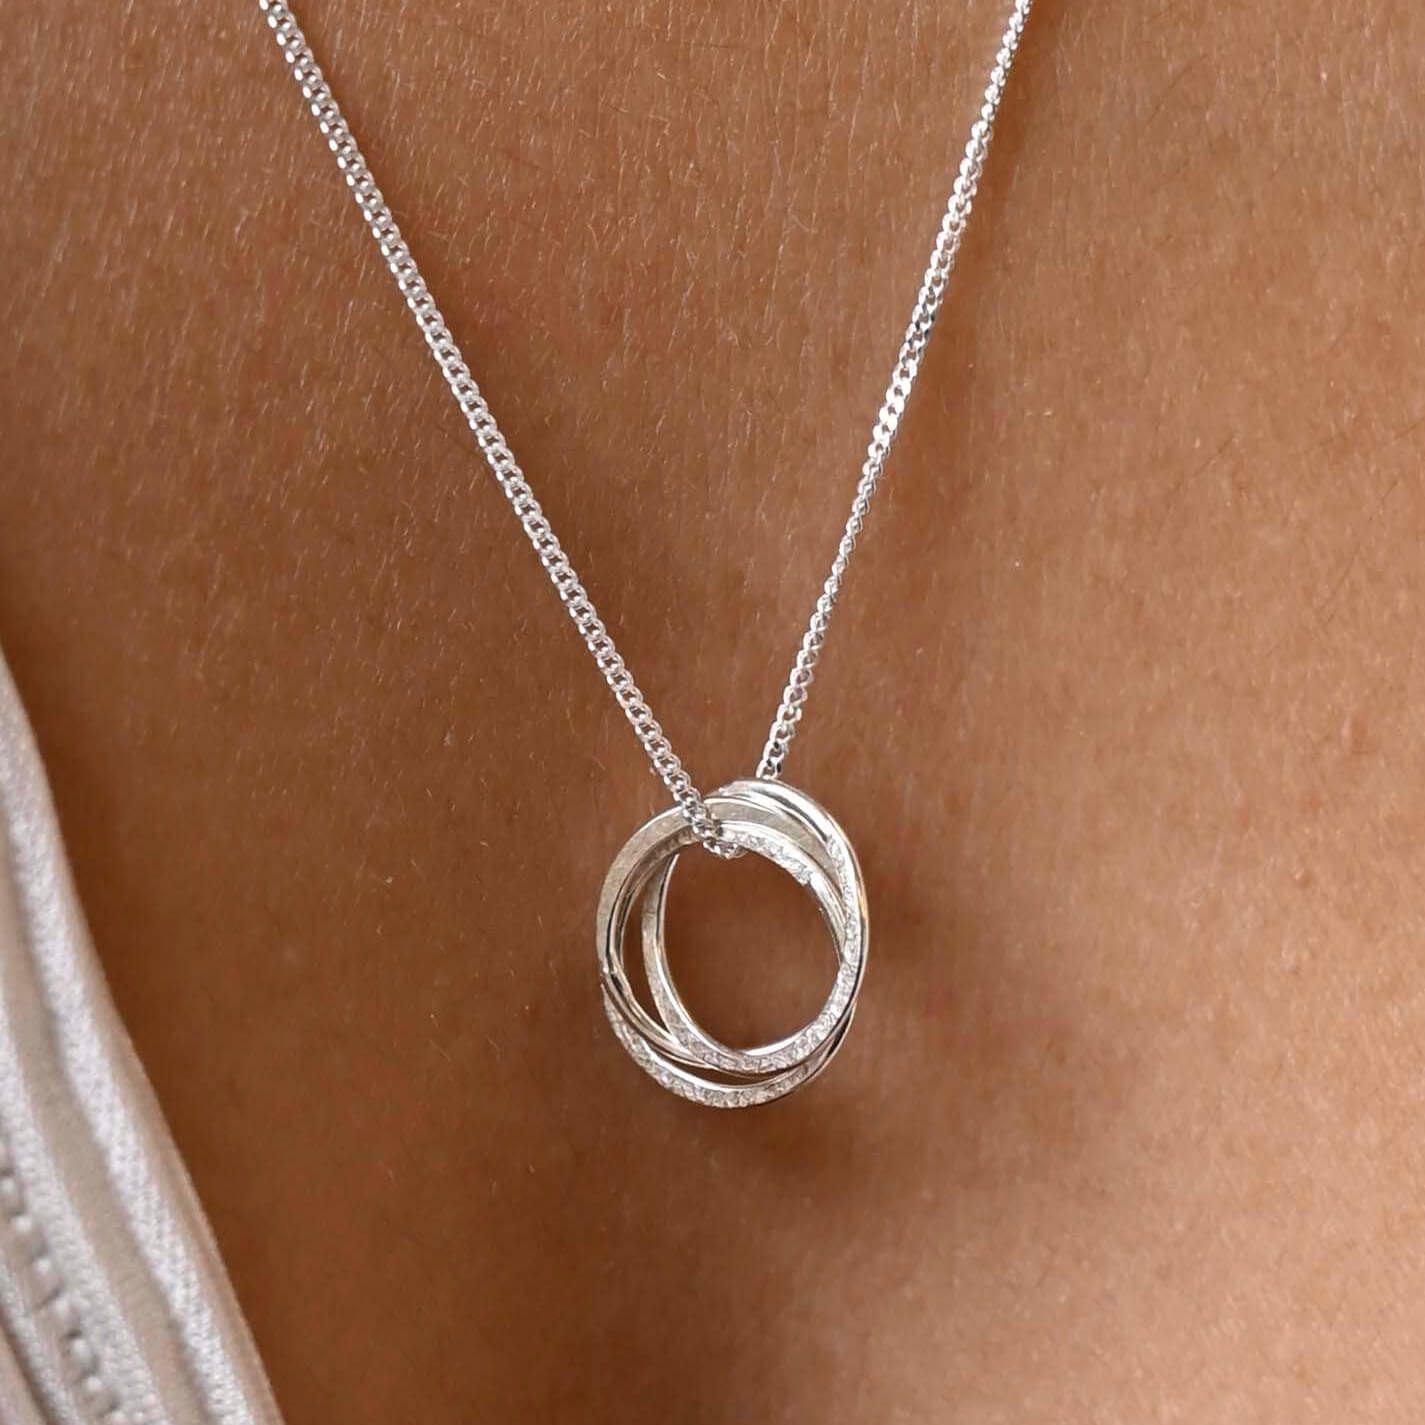 Silver Circle Pendant Necklace - Drumgreenagh Ethical Gift Shop